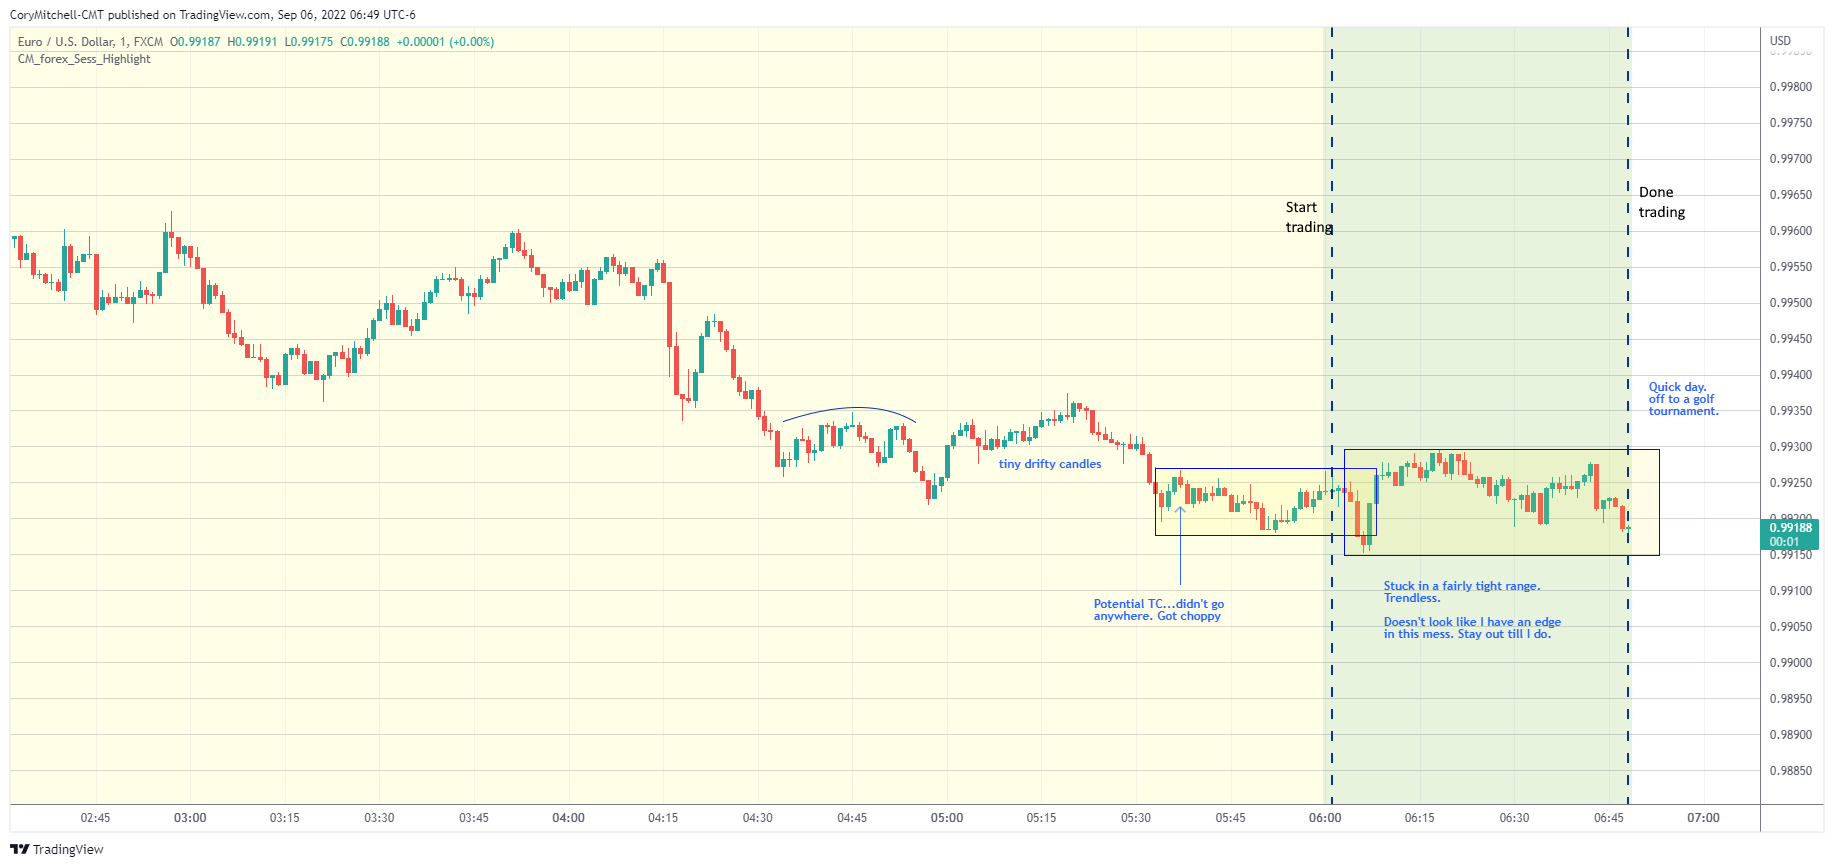 EURUSD day trading strategy examples Sept 6 2022